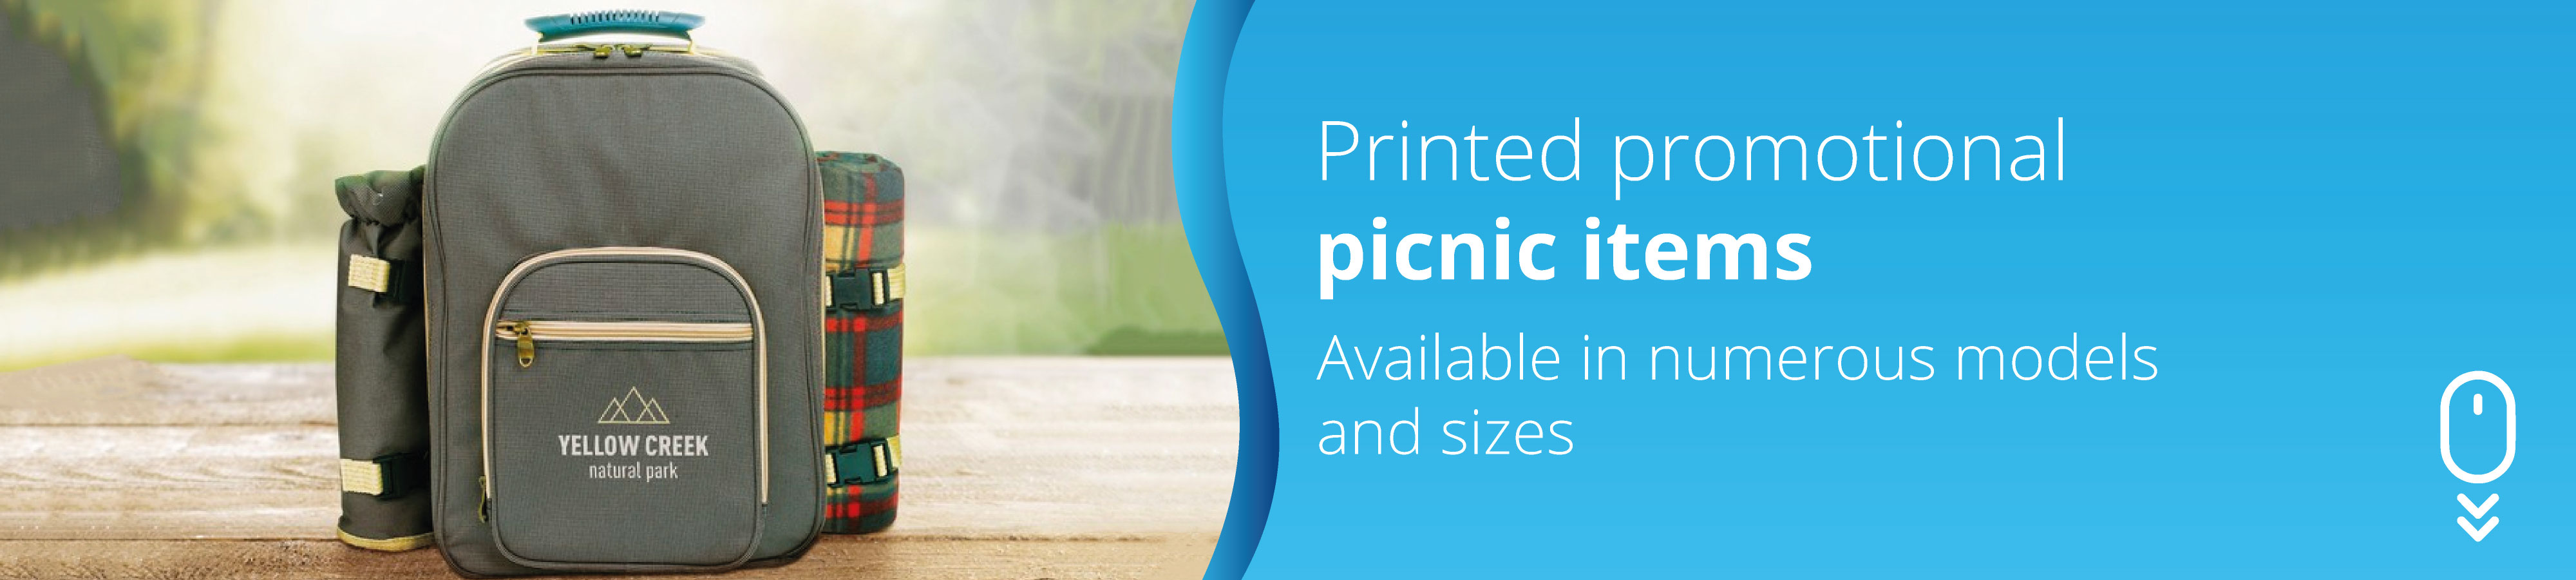 printed-promotional-picnic-items